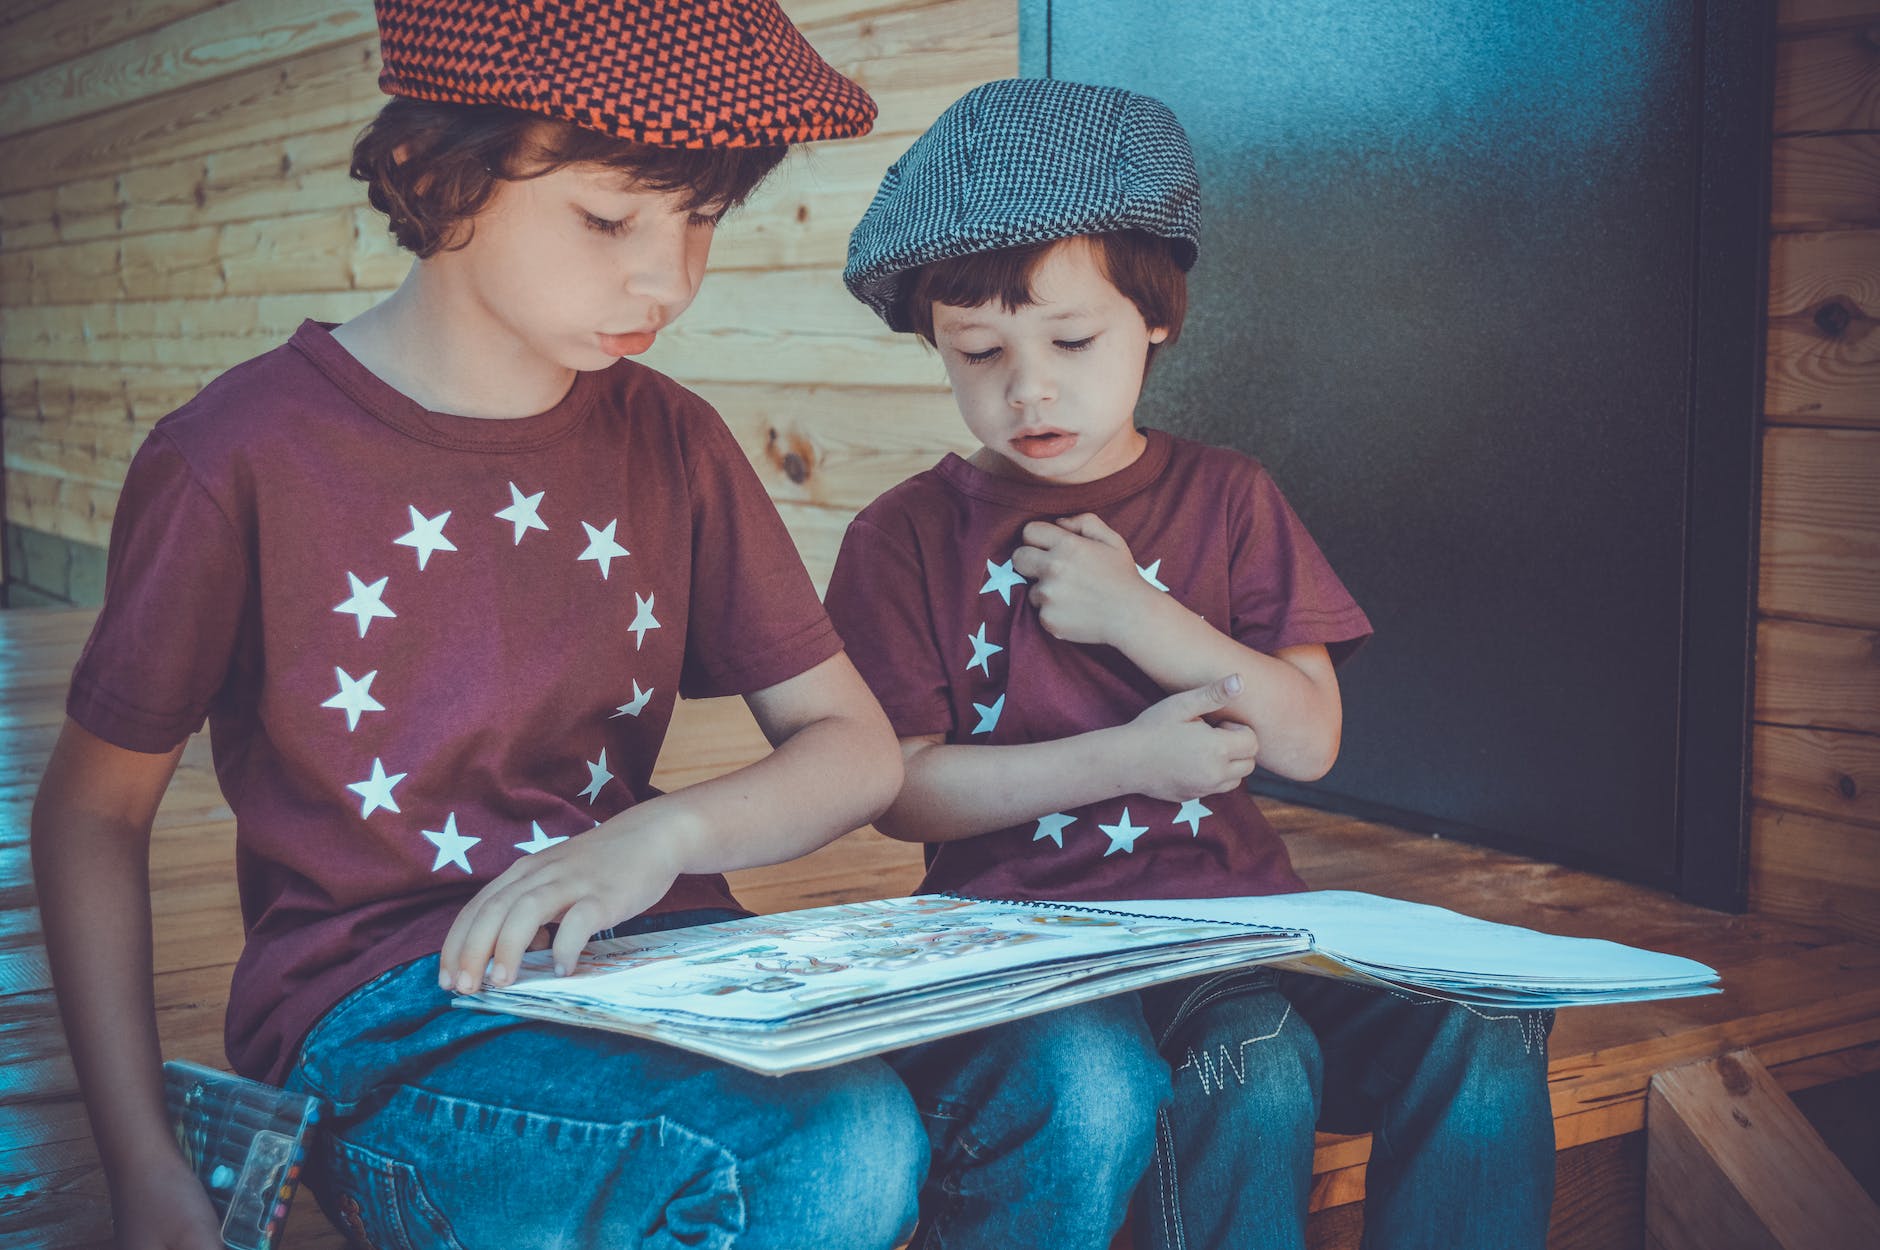 Transform Your Child’s Aversion to Reading into Affection